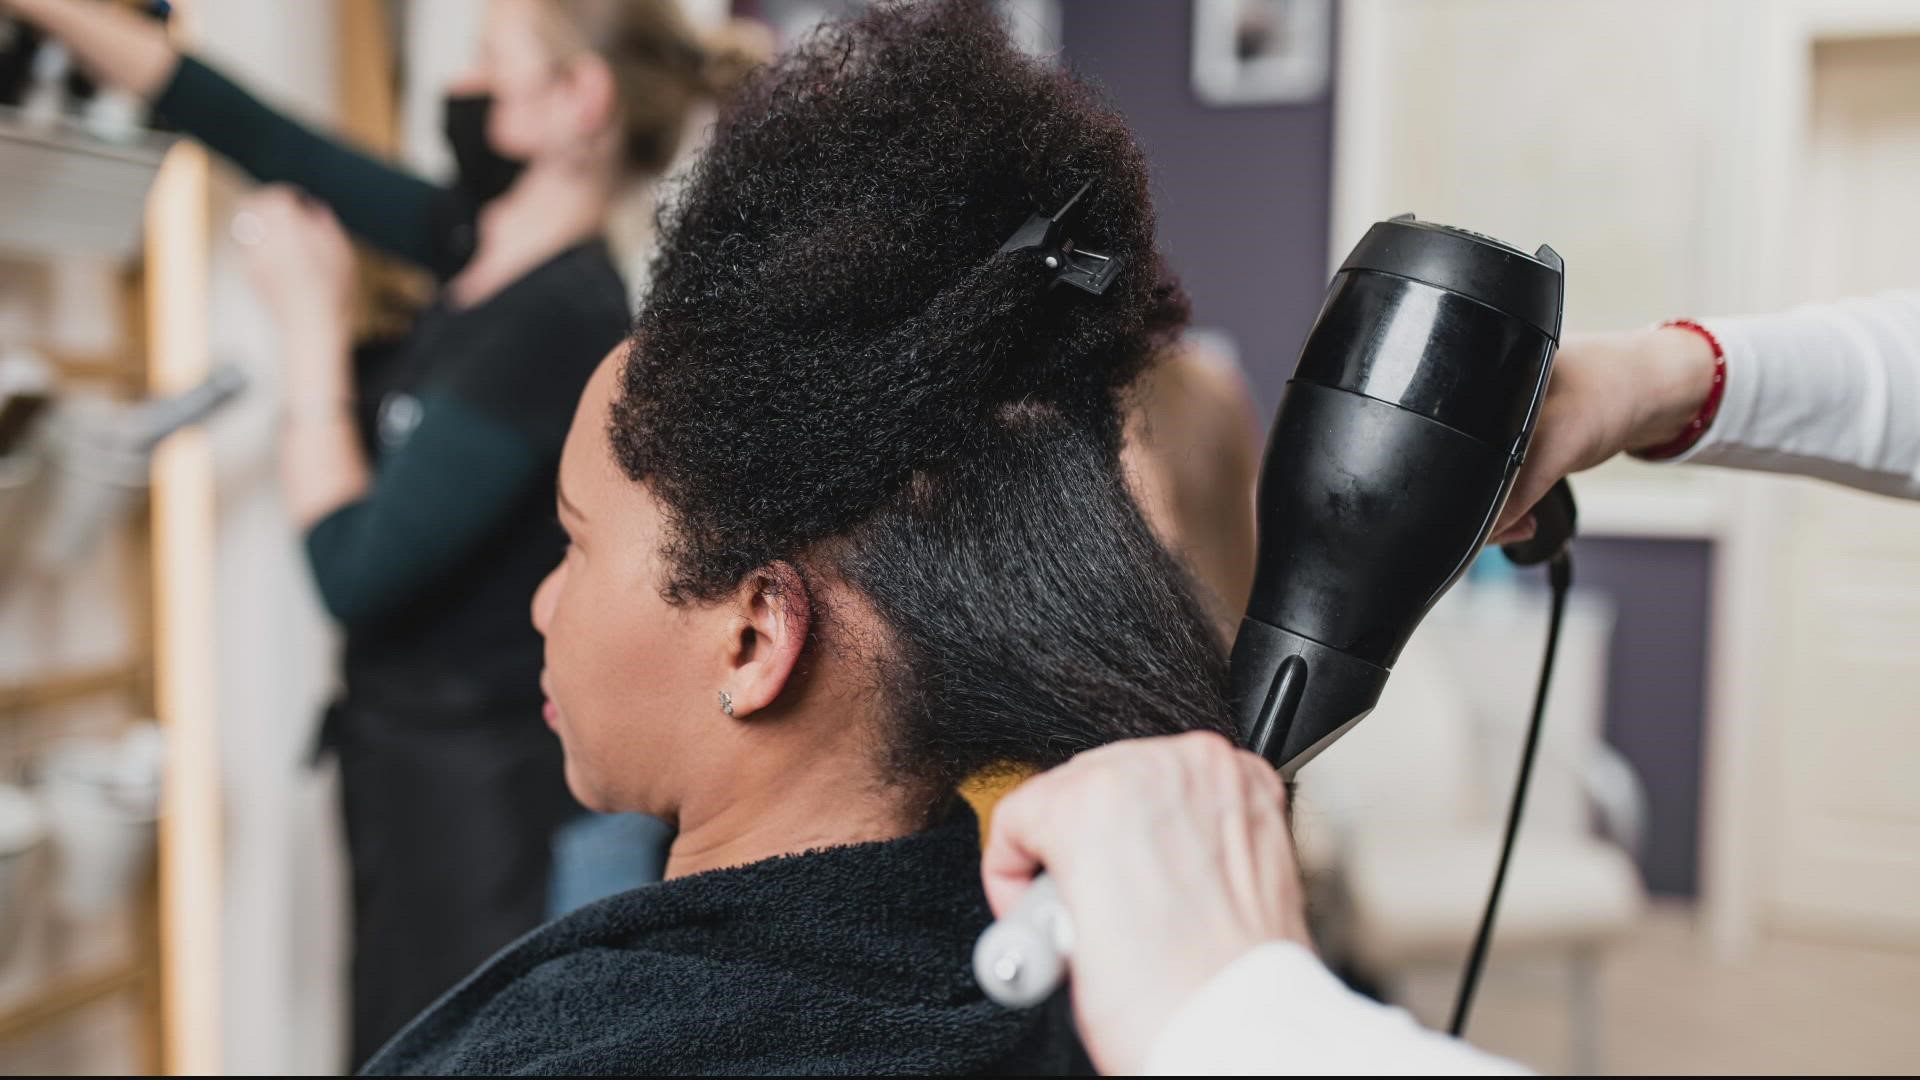 Researchers found that women who reported frequent use of hair straightening products were more than twice as likely to go on to develop uterine cancer